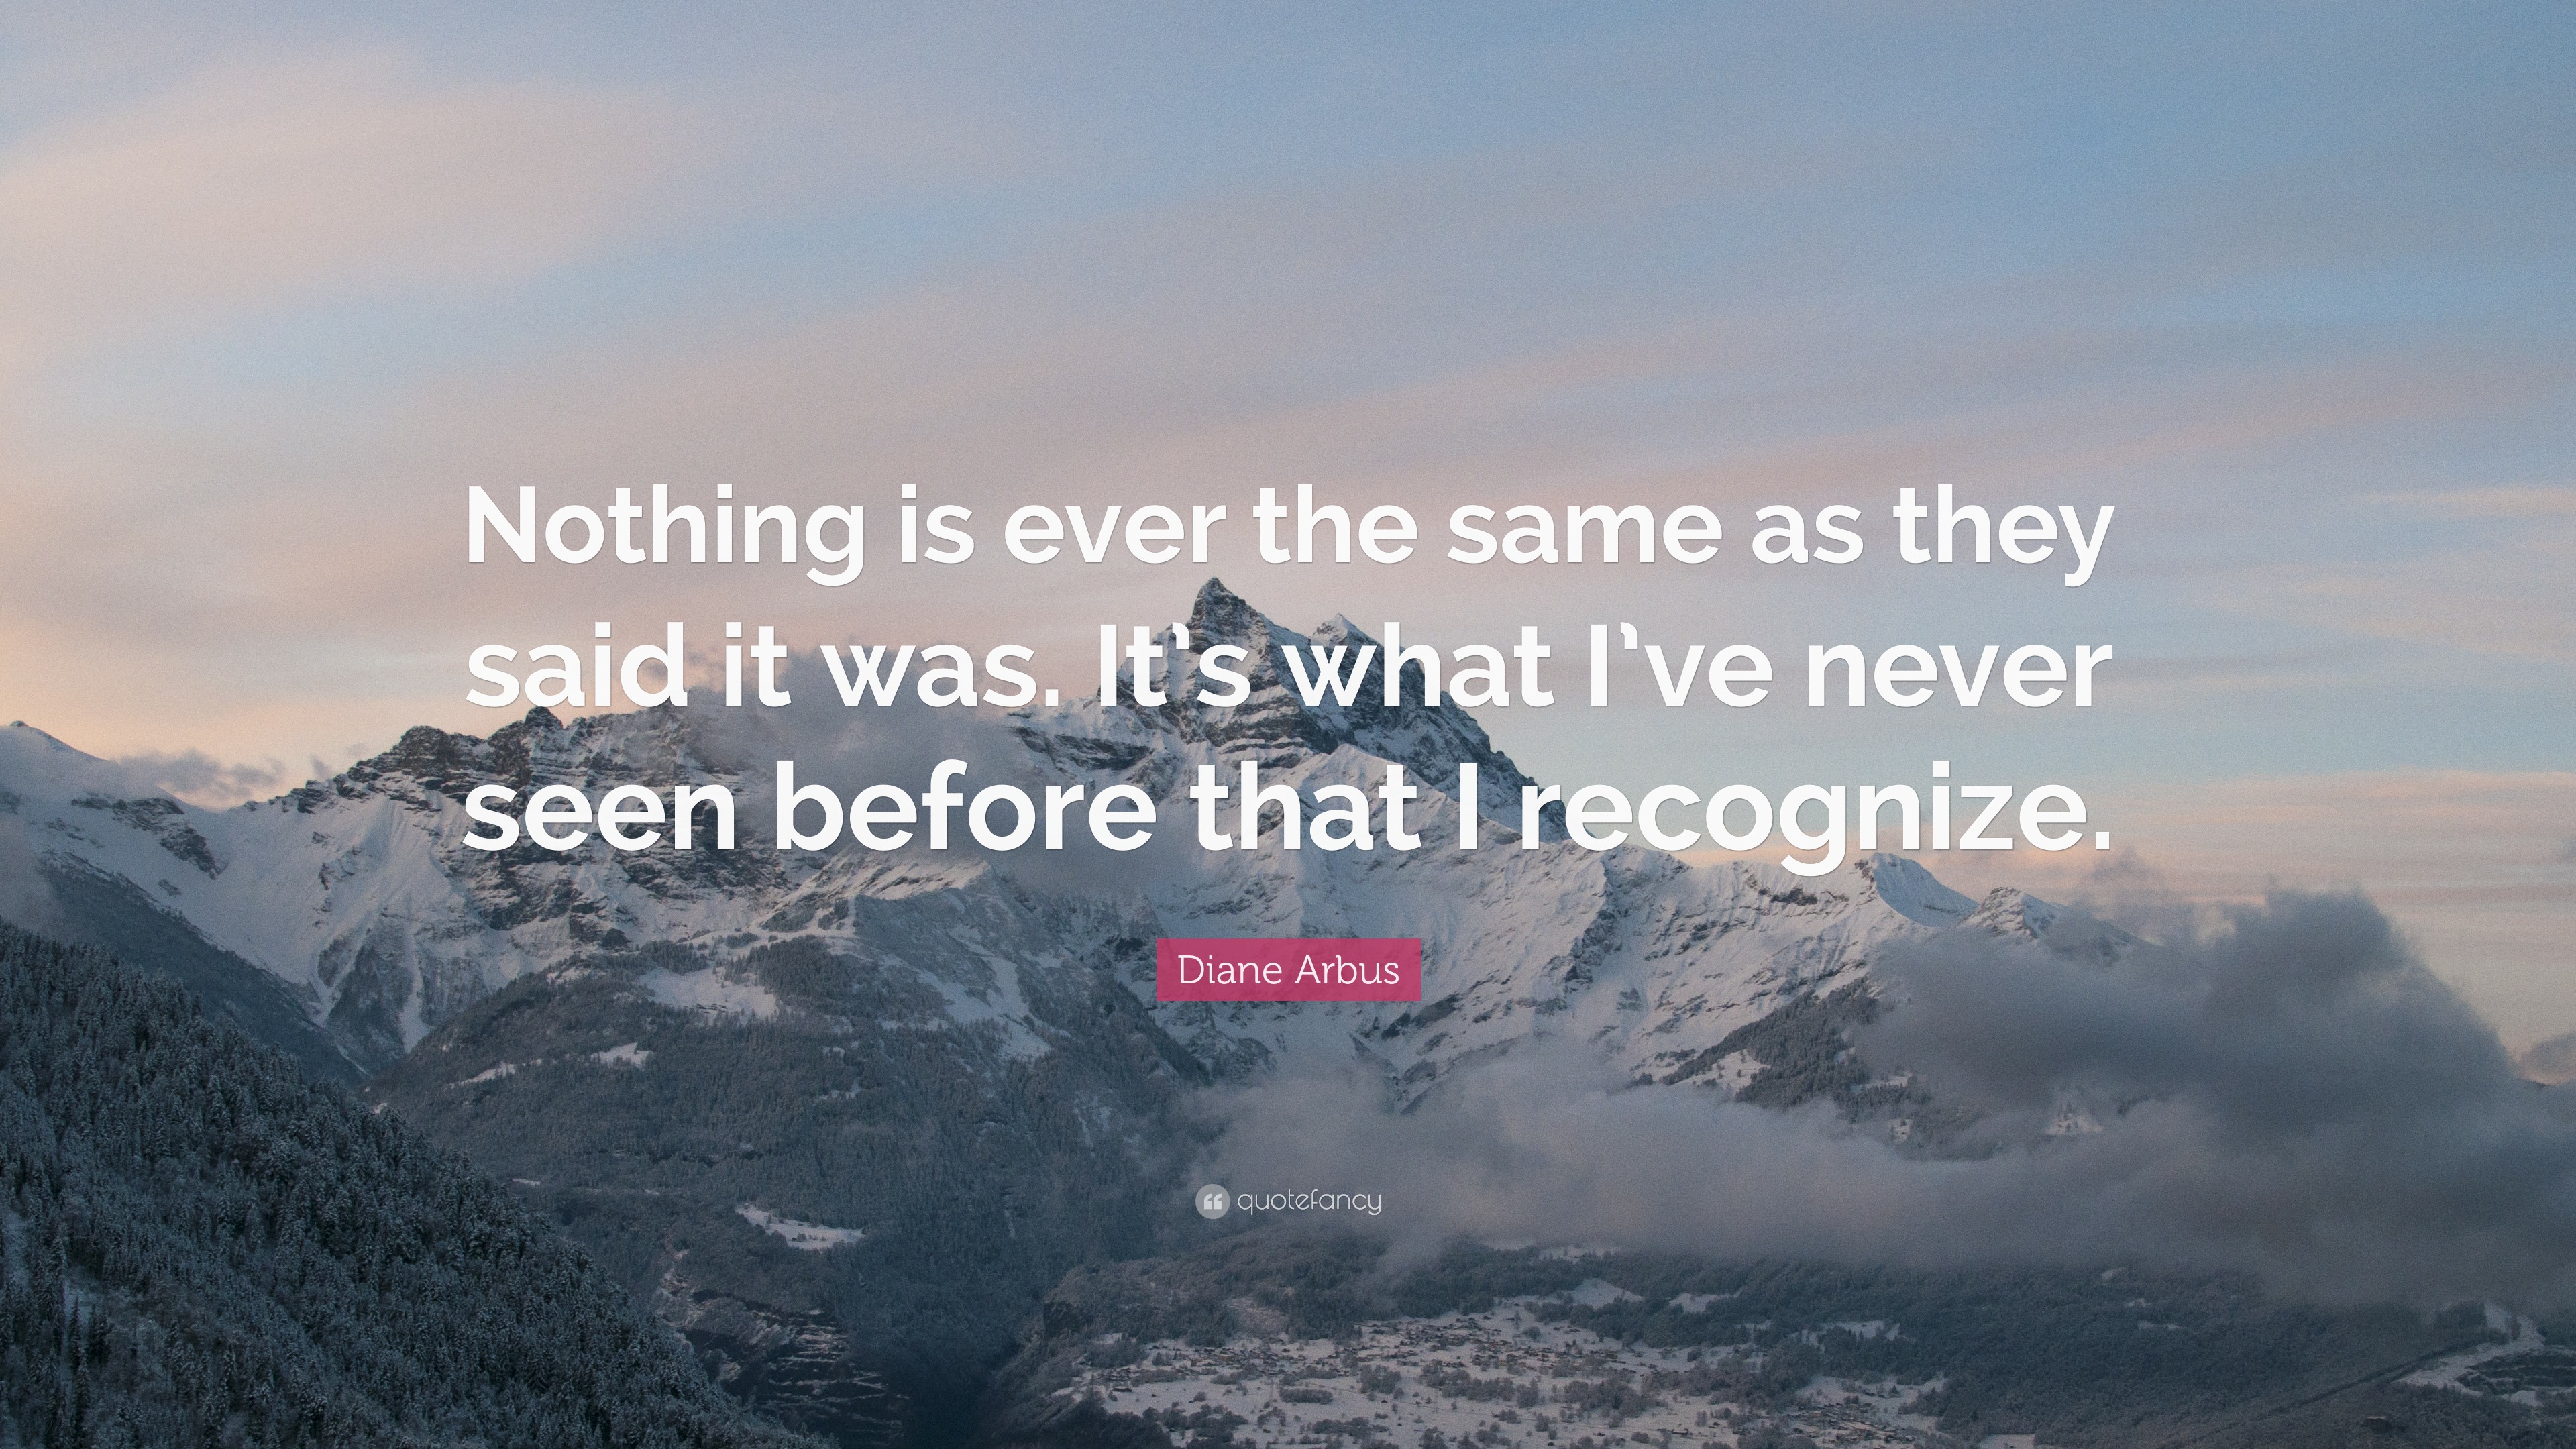 Diane Arbus Quote: “Nothing is ever the same as they said it was. It’s ...